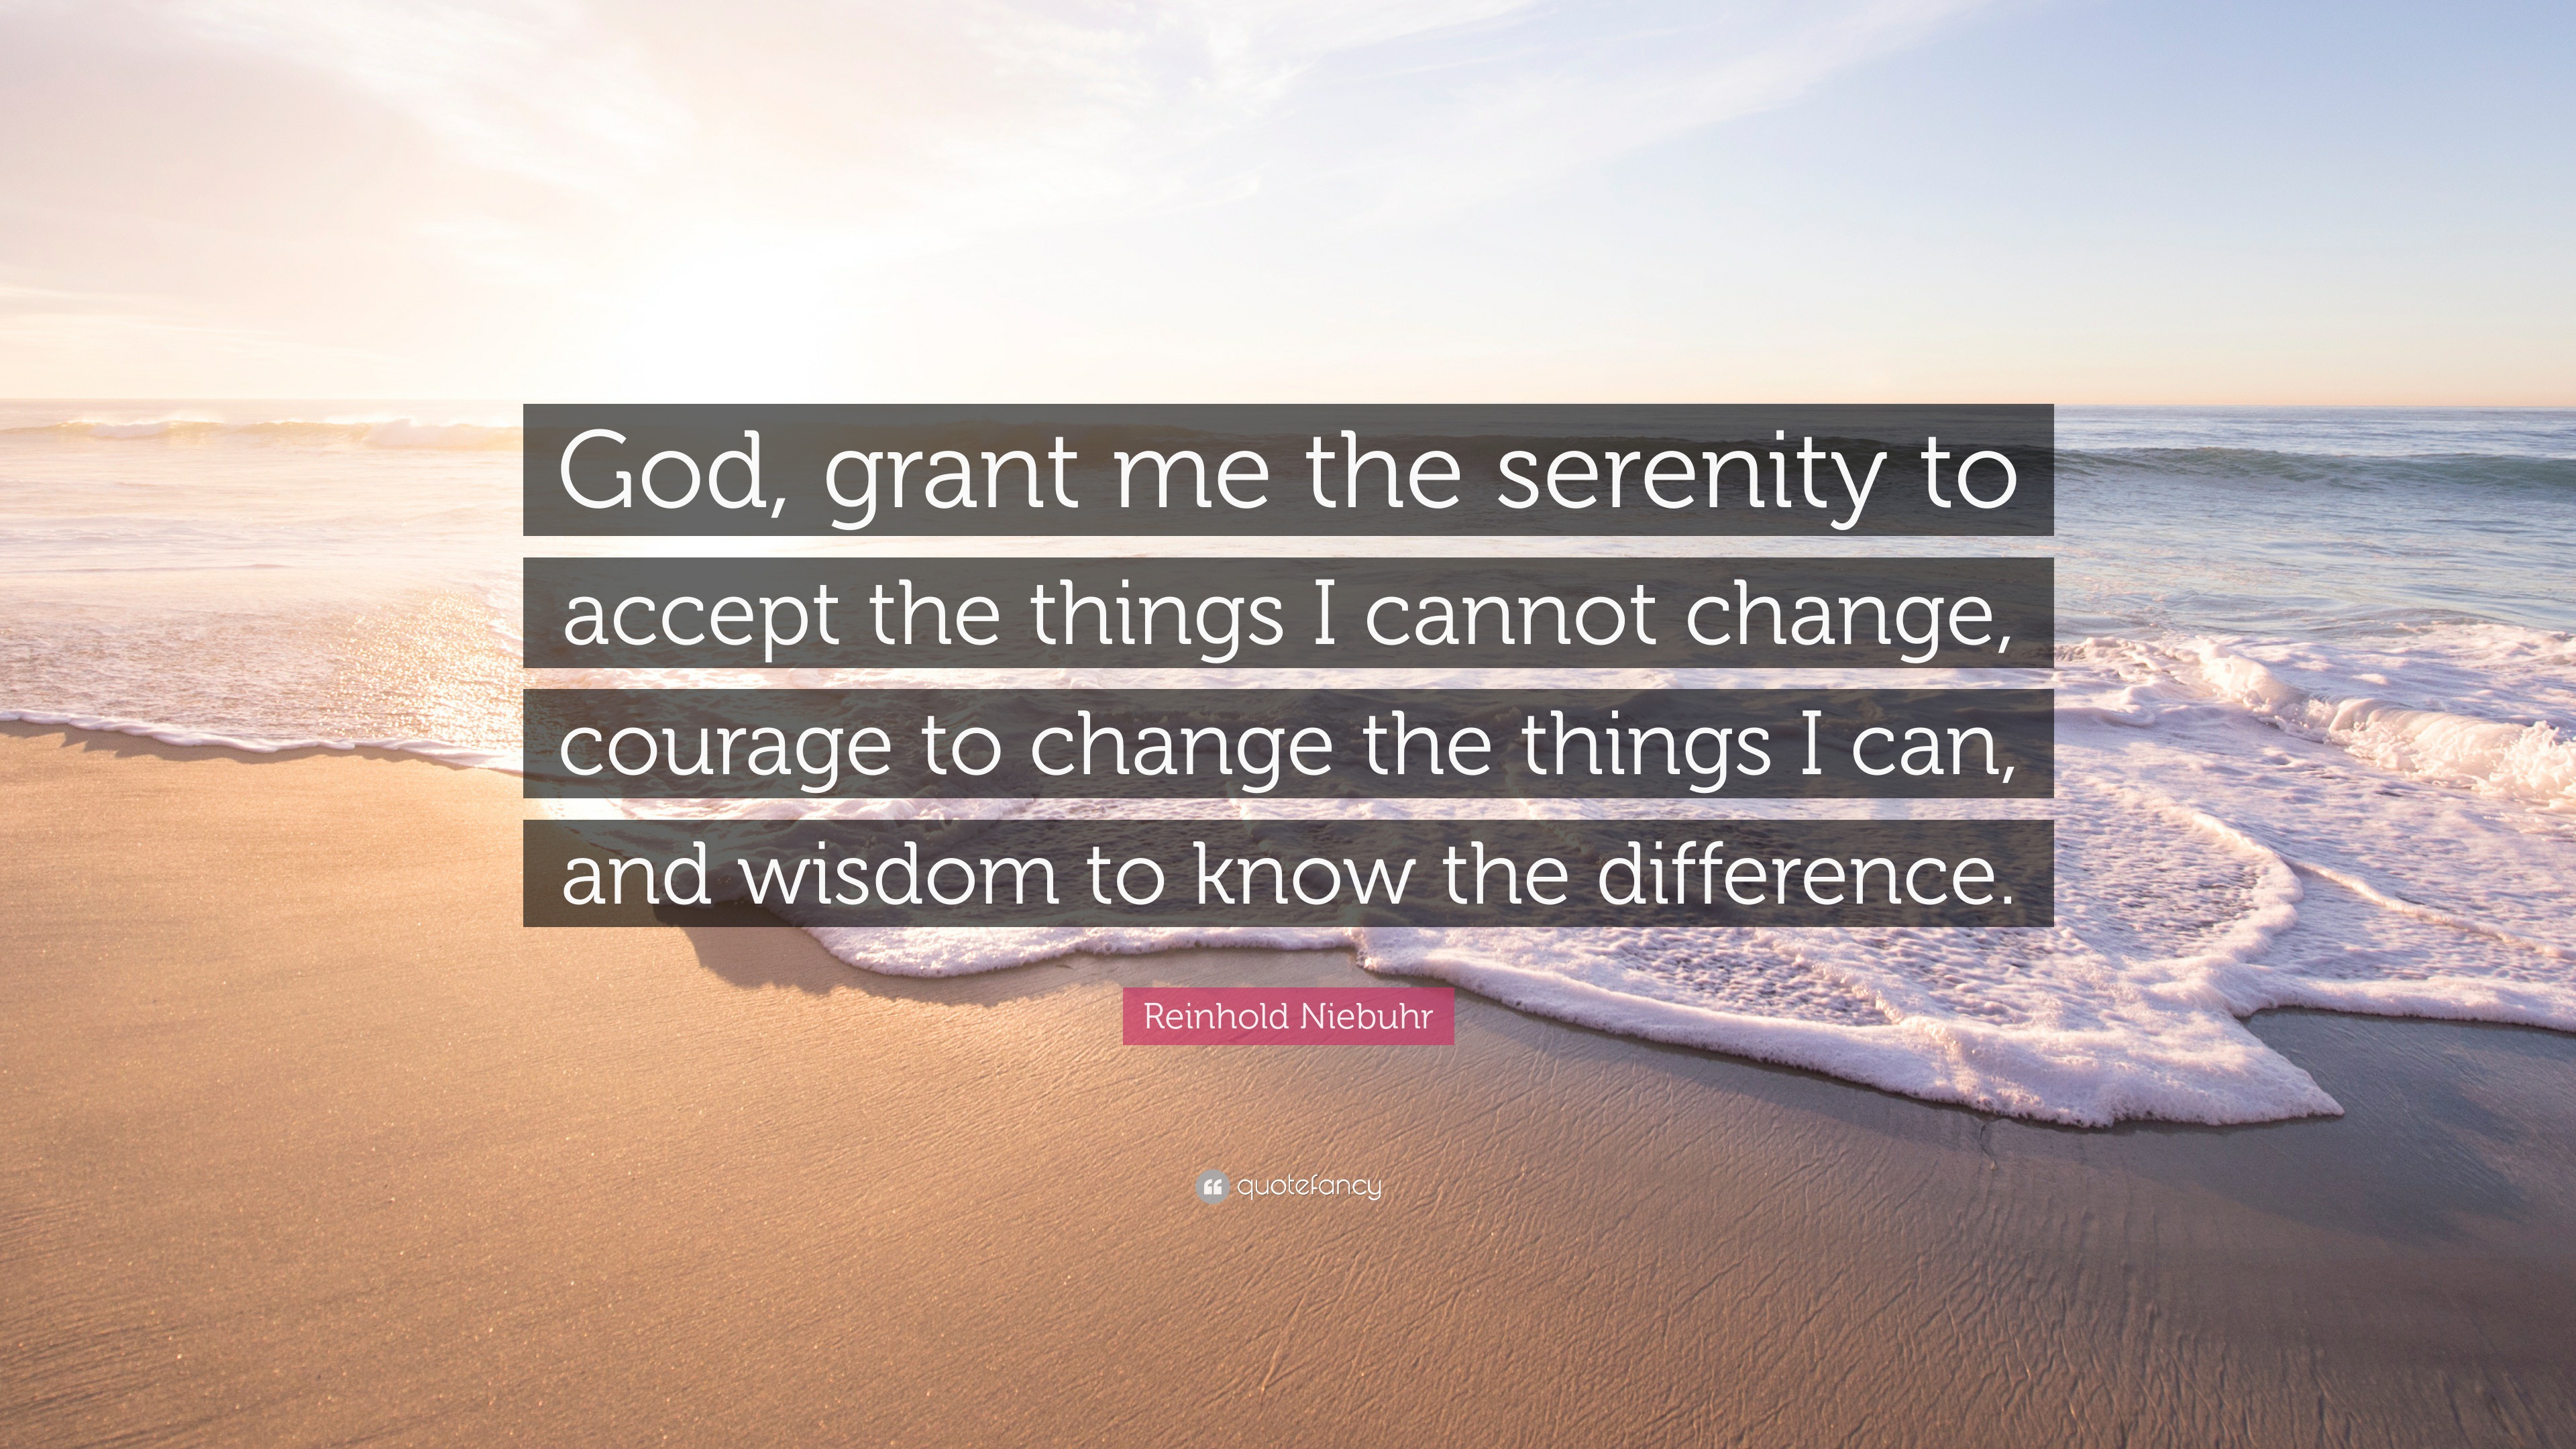 Reinhold Niebuhr Quote: “God grant me the serenity to accept the things